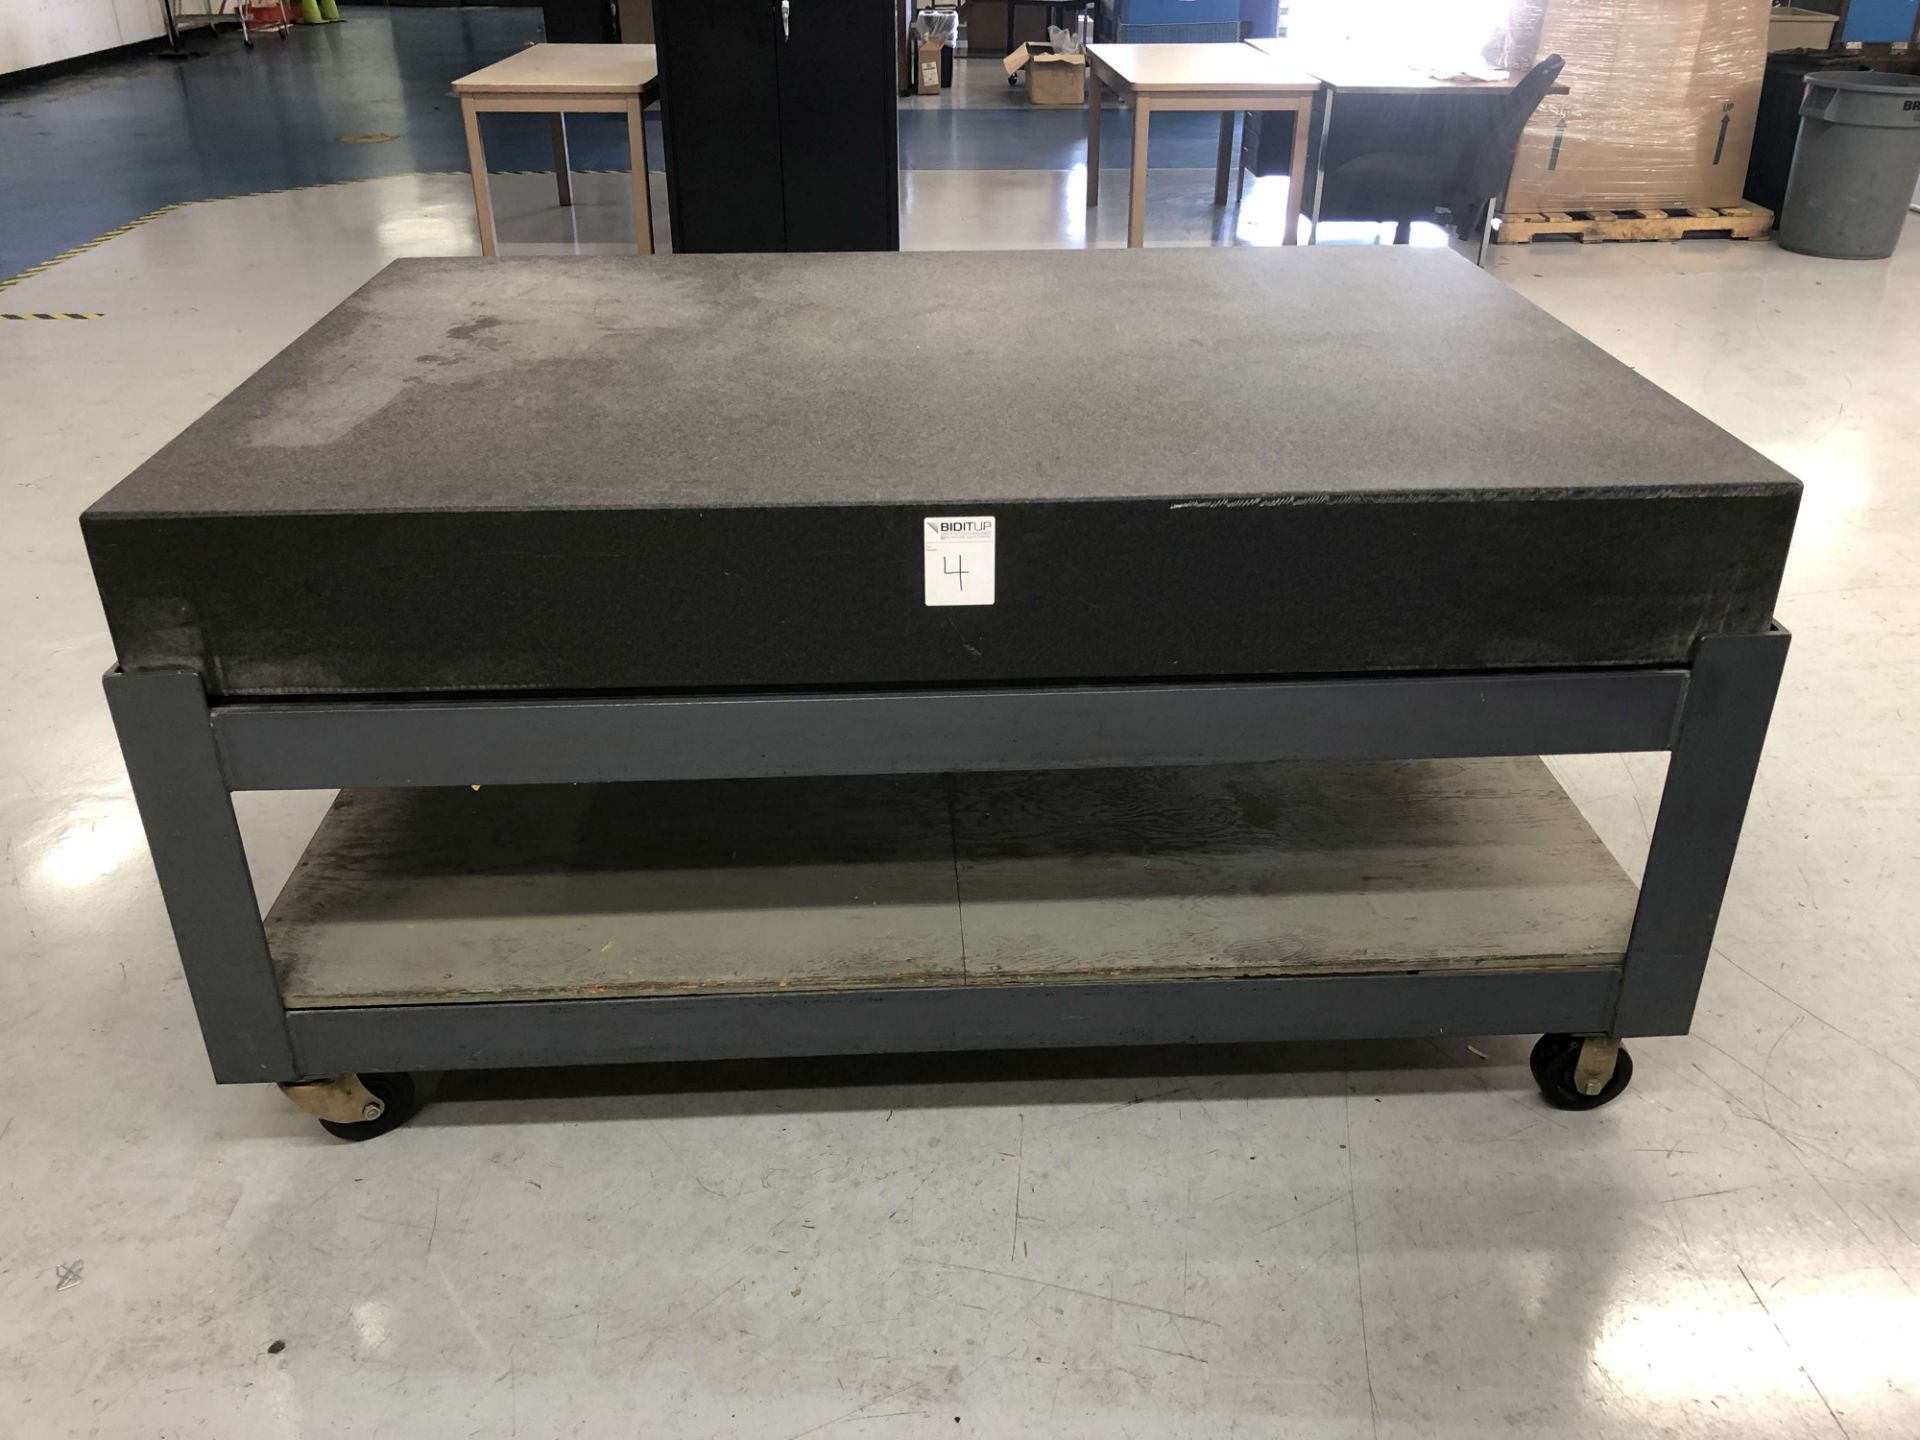 Stanridge 6' x 4' x 8" Thick Granite Surface Plate on Roller Stand [Located @ 1700 Business Center